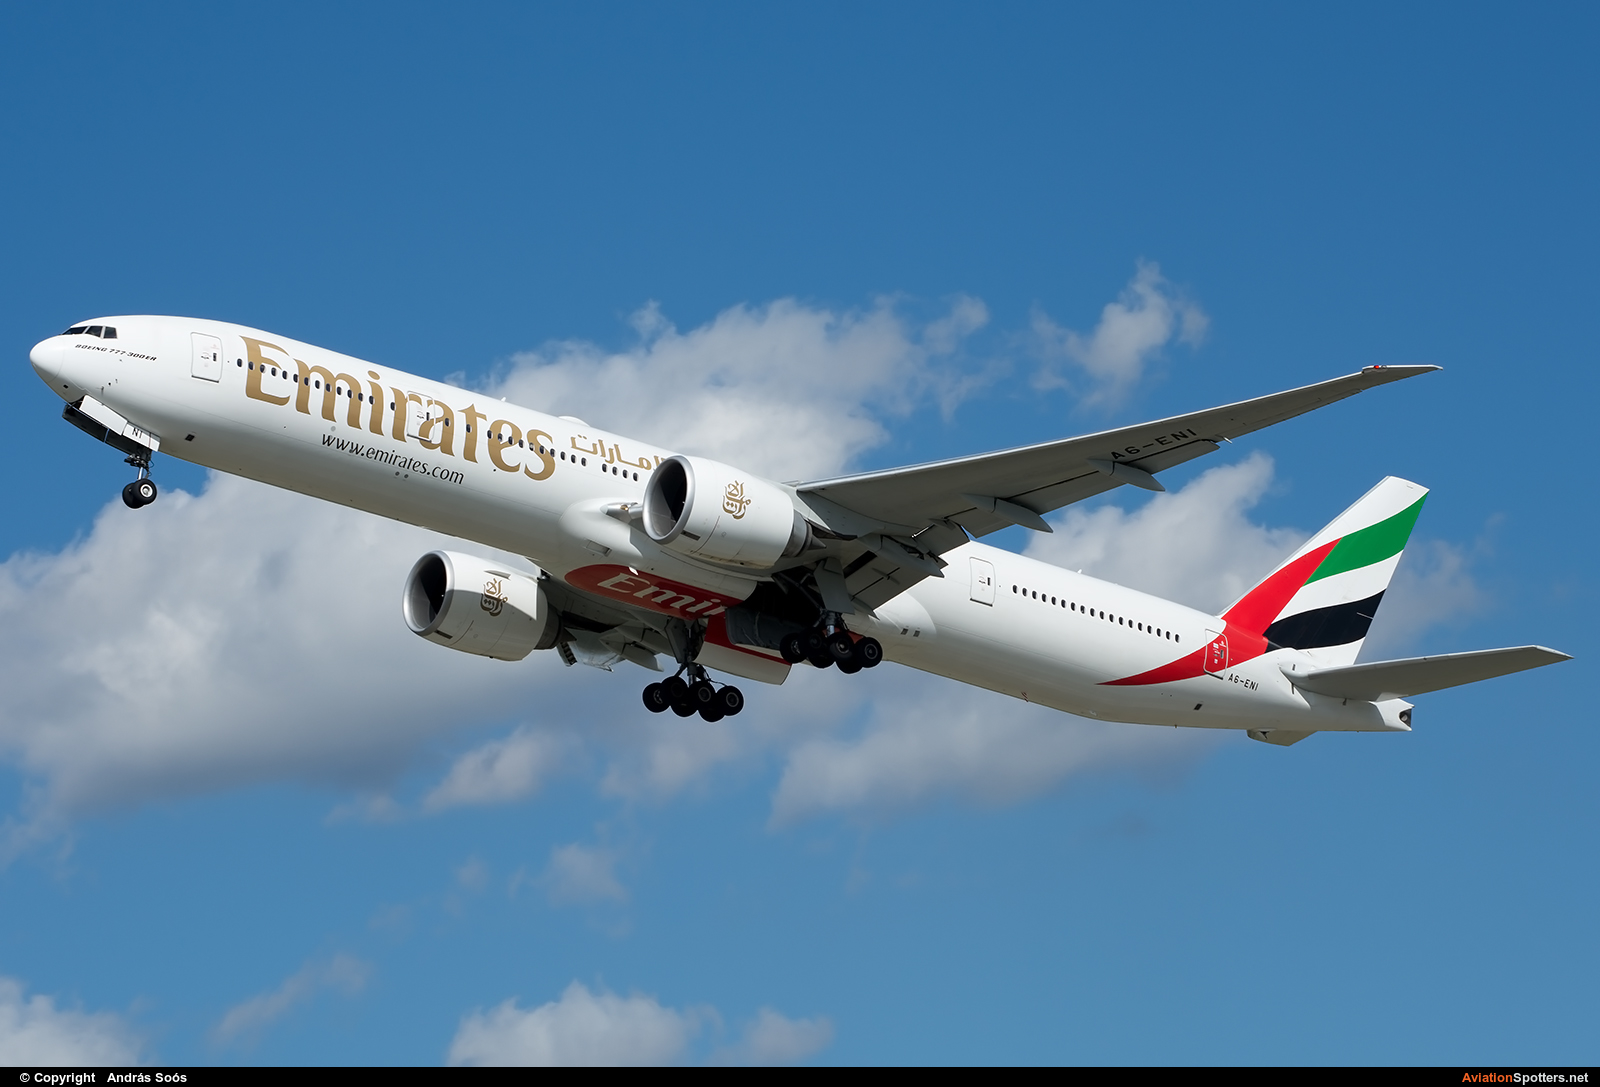 Emirates Airlines  -  777-300ER  (A6-ENI) By András Soós (sas1965)